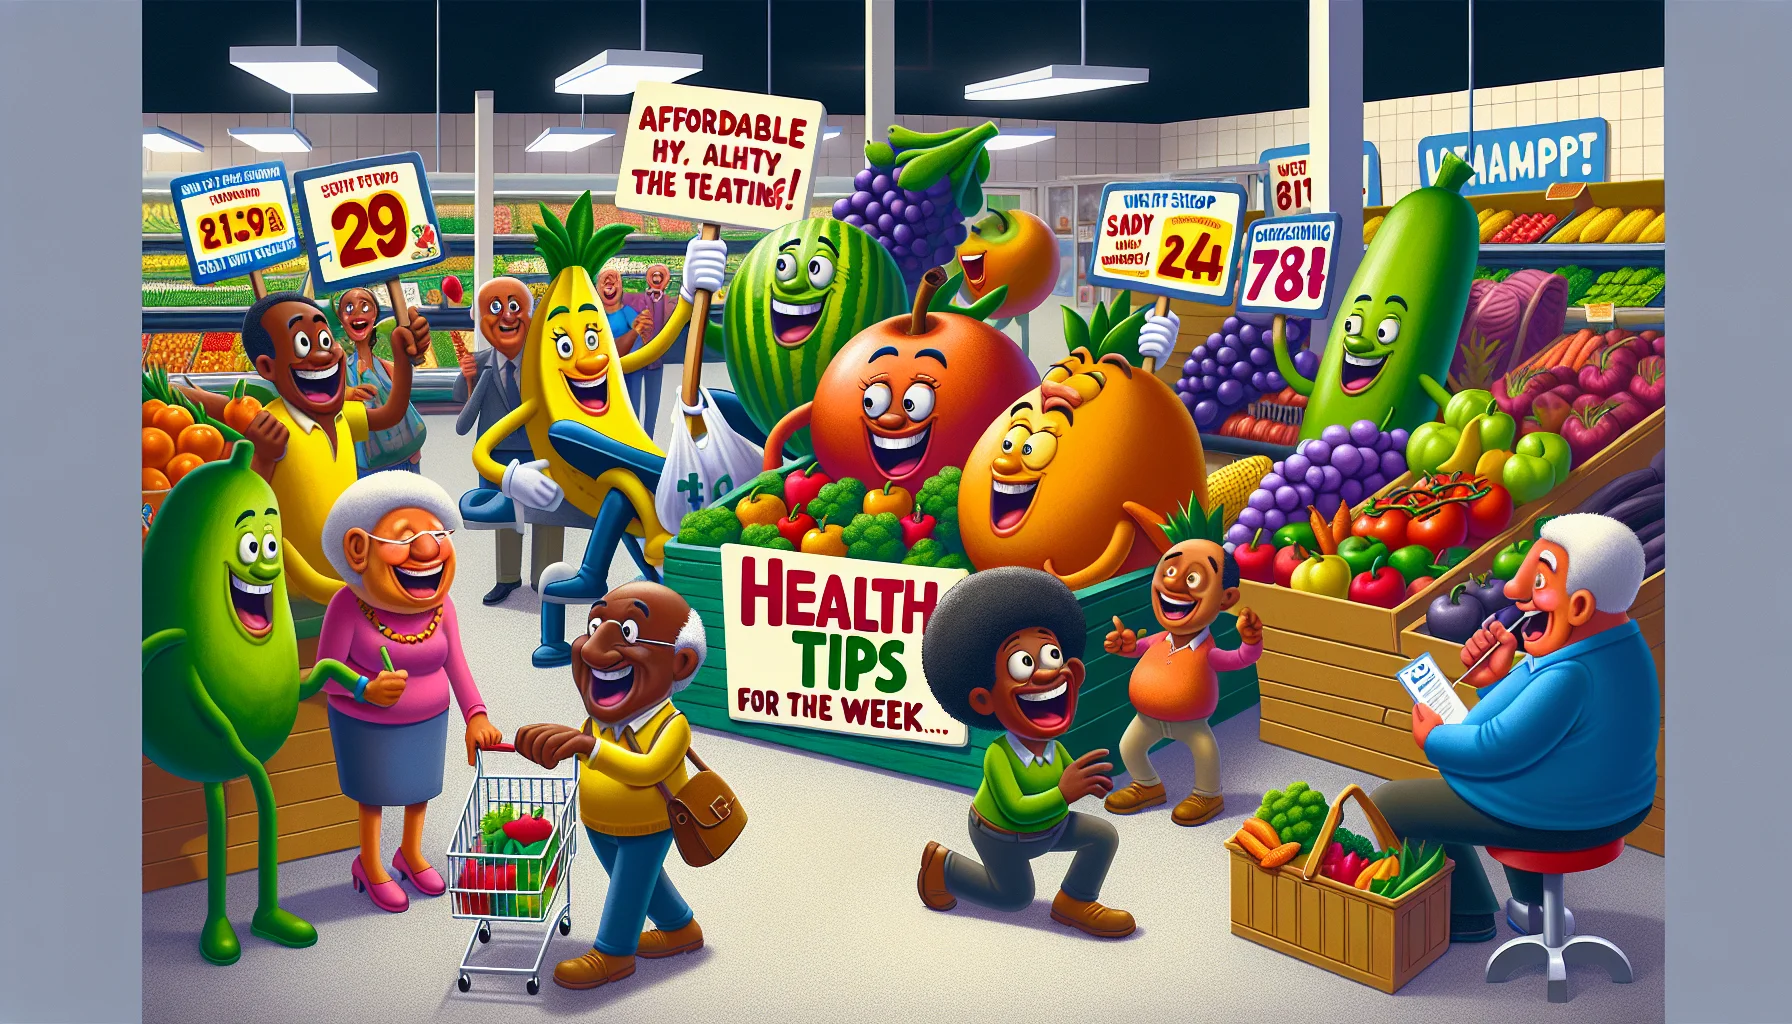 Create a colorful and humorous image of a grocery store scene, where a variety of fruits and vegetables are engaging in theatrical antics to attract attention. The fruits and vegetables are anthropomorphised and are holding up signs that read 